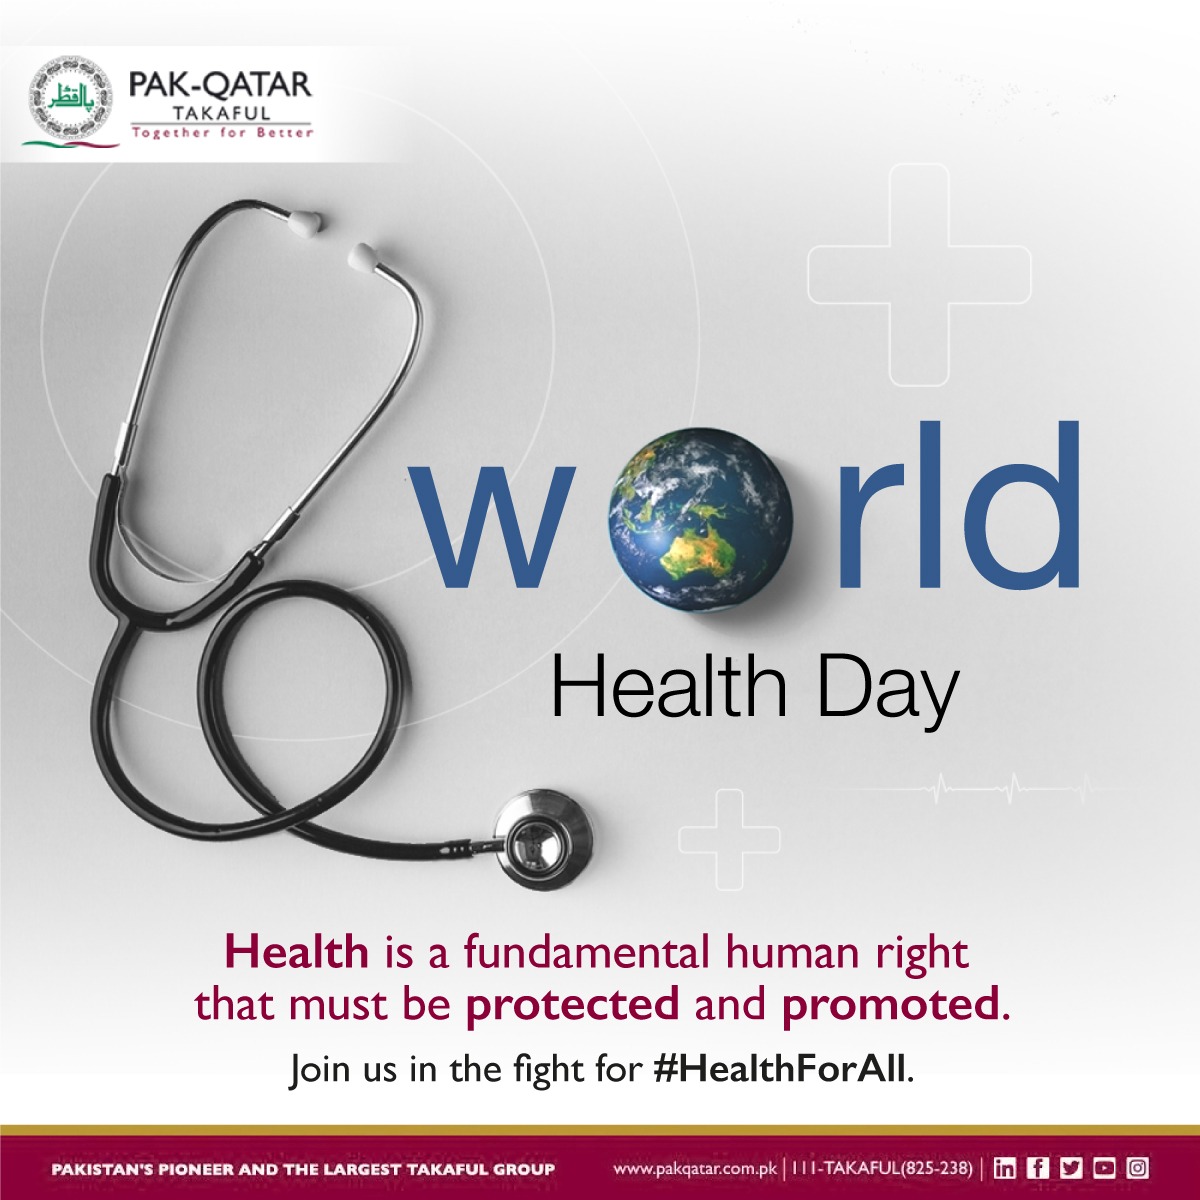 A small changes can make a big impact on the overall health. Let's all commit to making our health a priority!

To learn more please visit:
pakqatar.com.pk/family/individ…

#PakQatar #Takaful #HealthTakaful #FamilySehat #WorldHealthDay #HealthAndWellness #RegularCheckups #HealthyEating